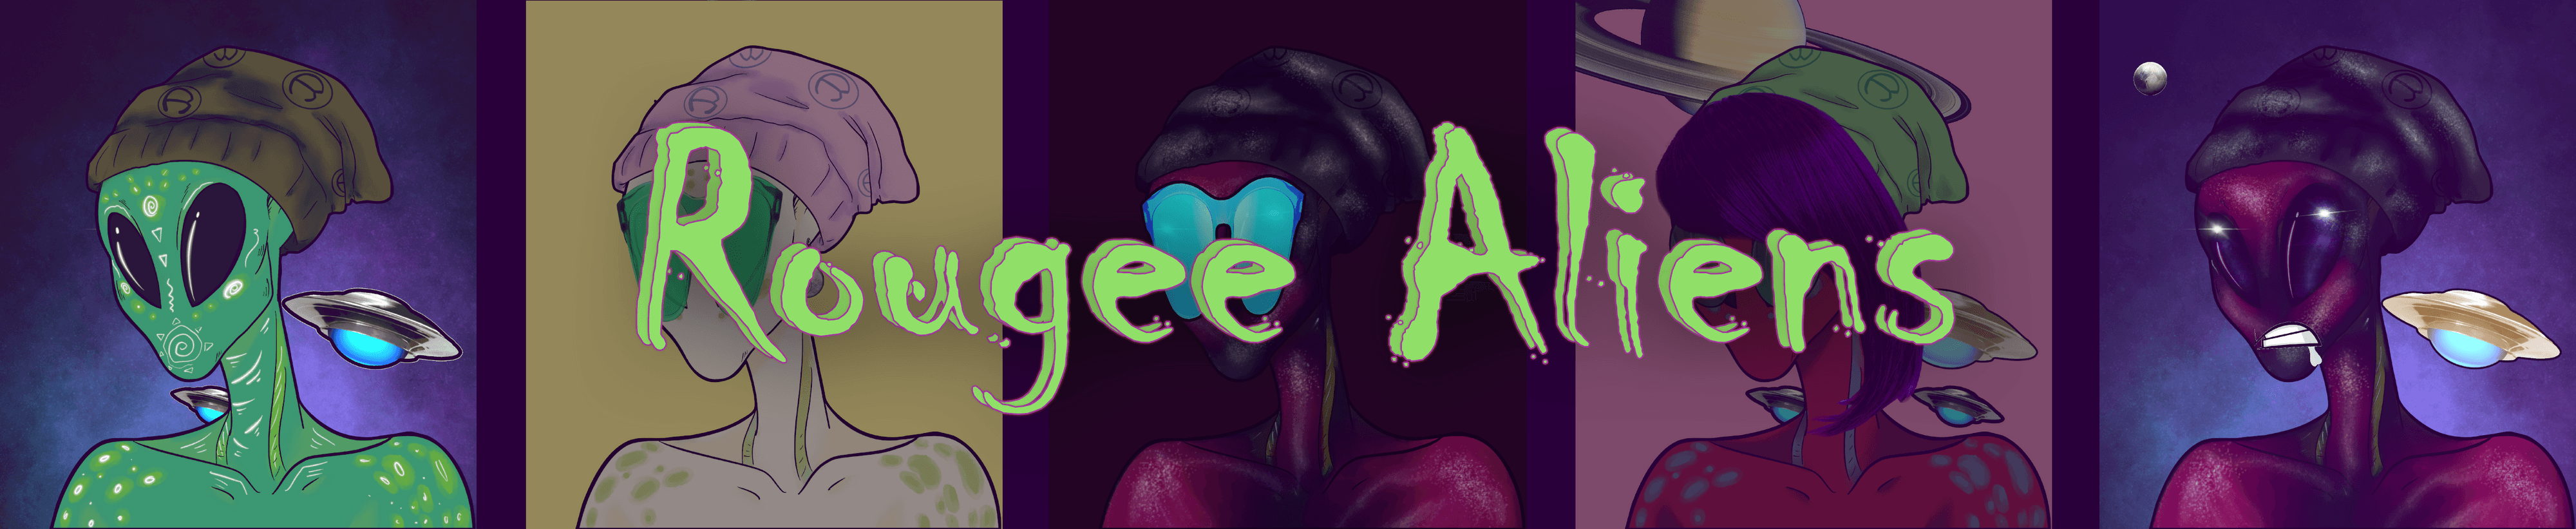 RouGee Aliens